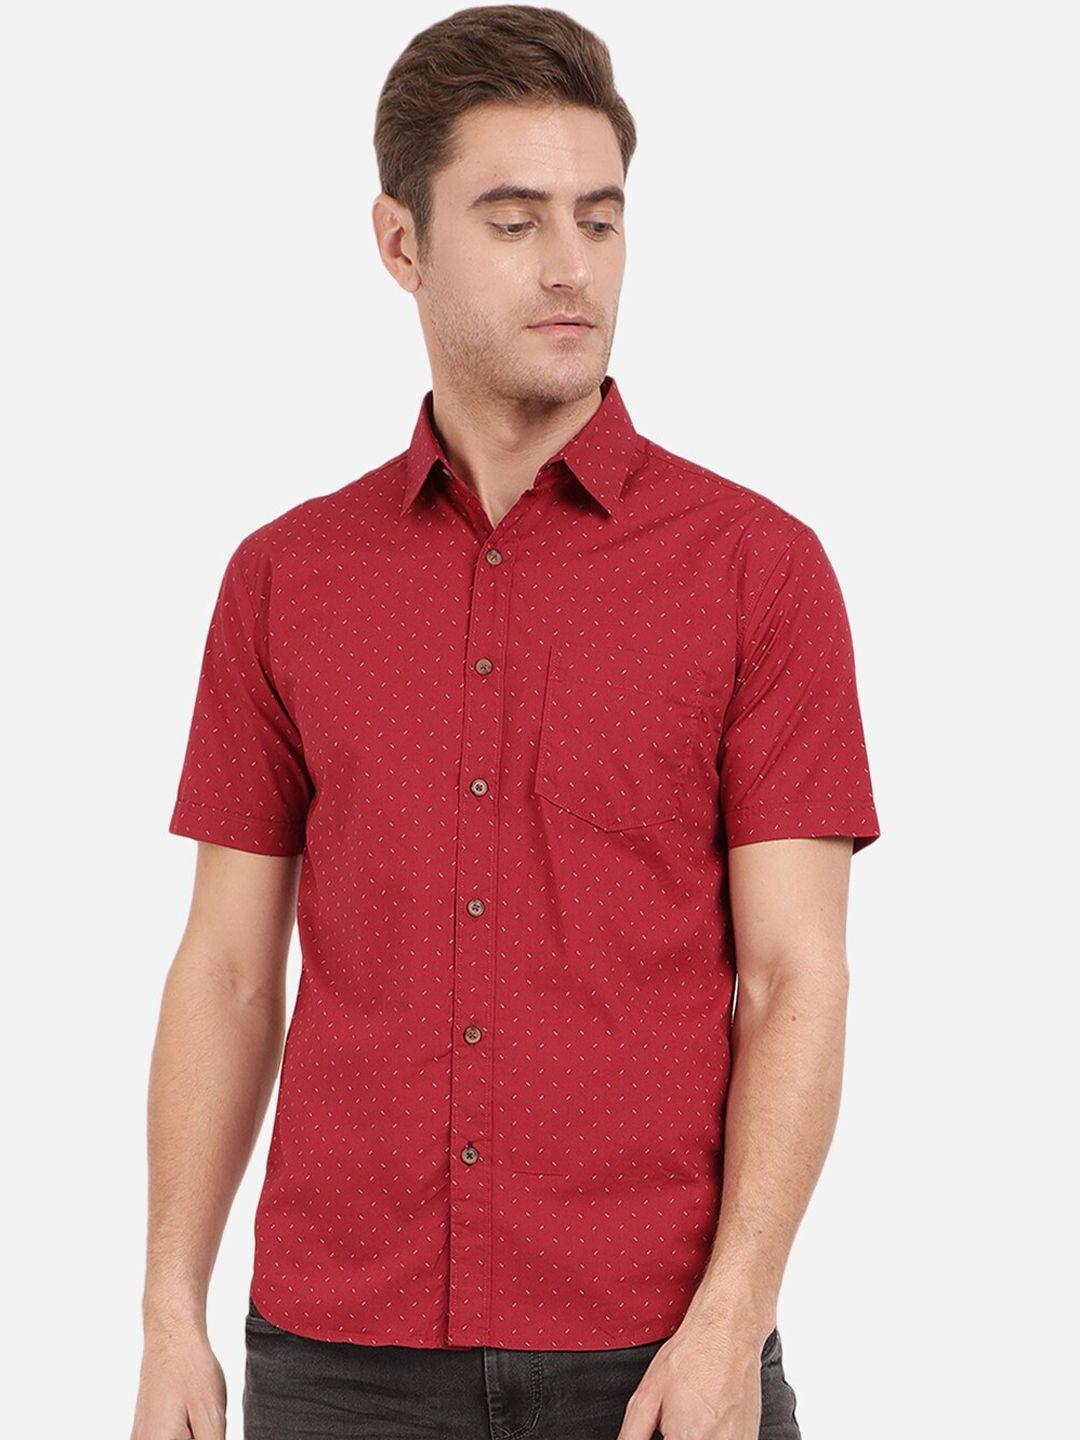 greenfibre-men-red-slim-fit-micro-ditsy-printed-pure-cotton-casual-shirt